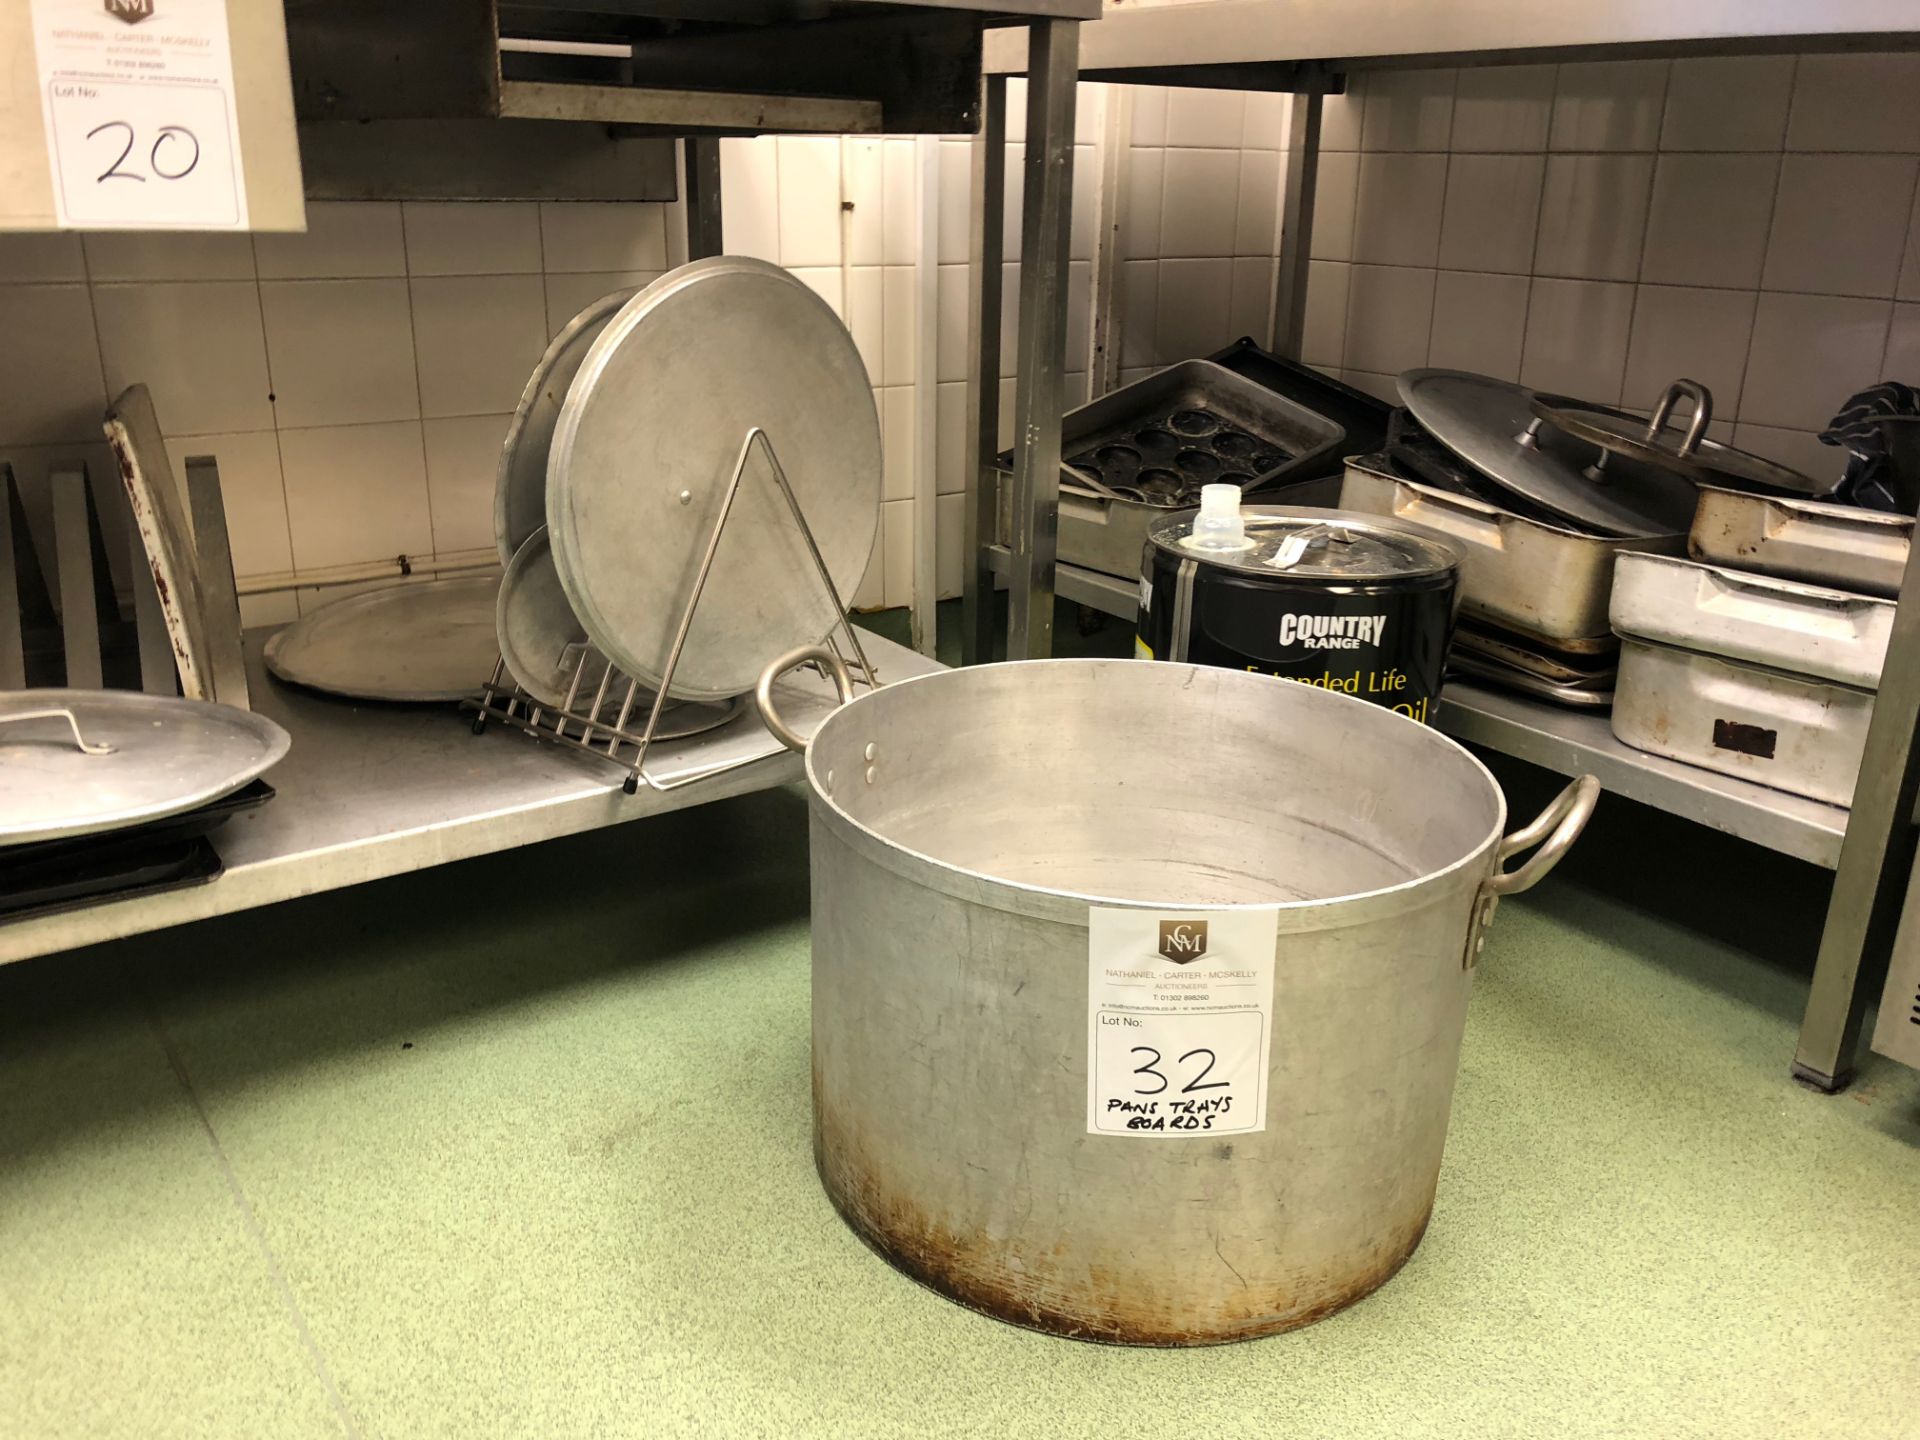 Stainless Steel Commercial Pots & Pans - Image 2 of 2